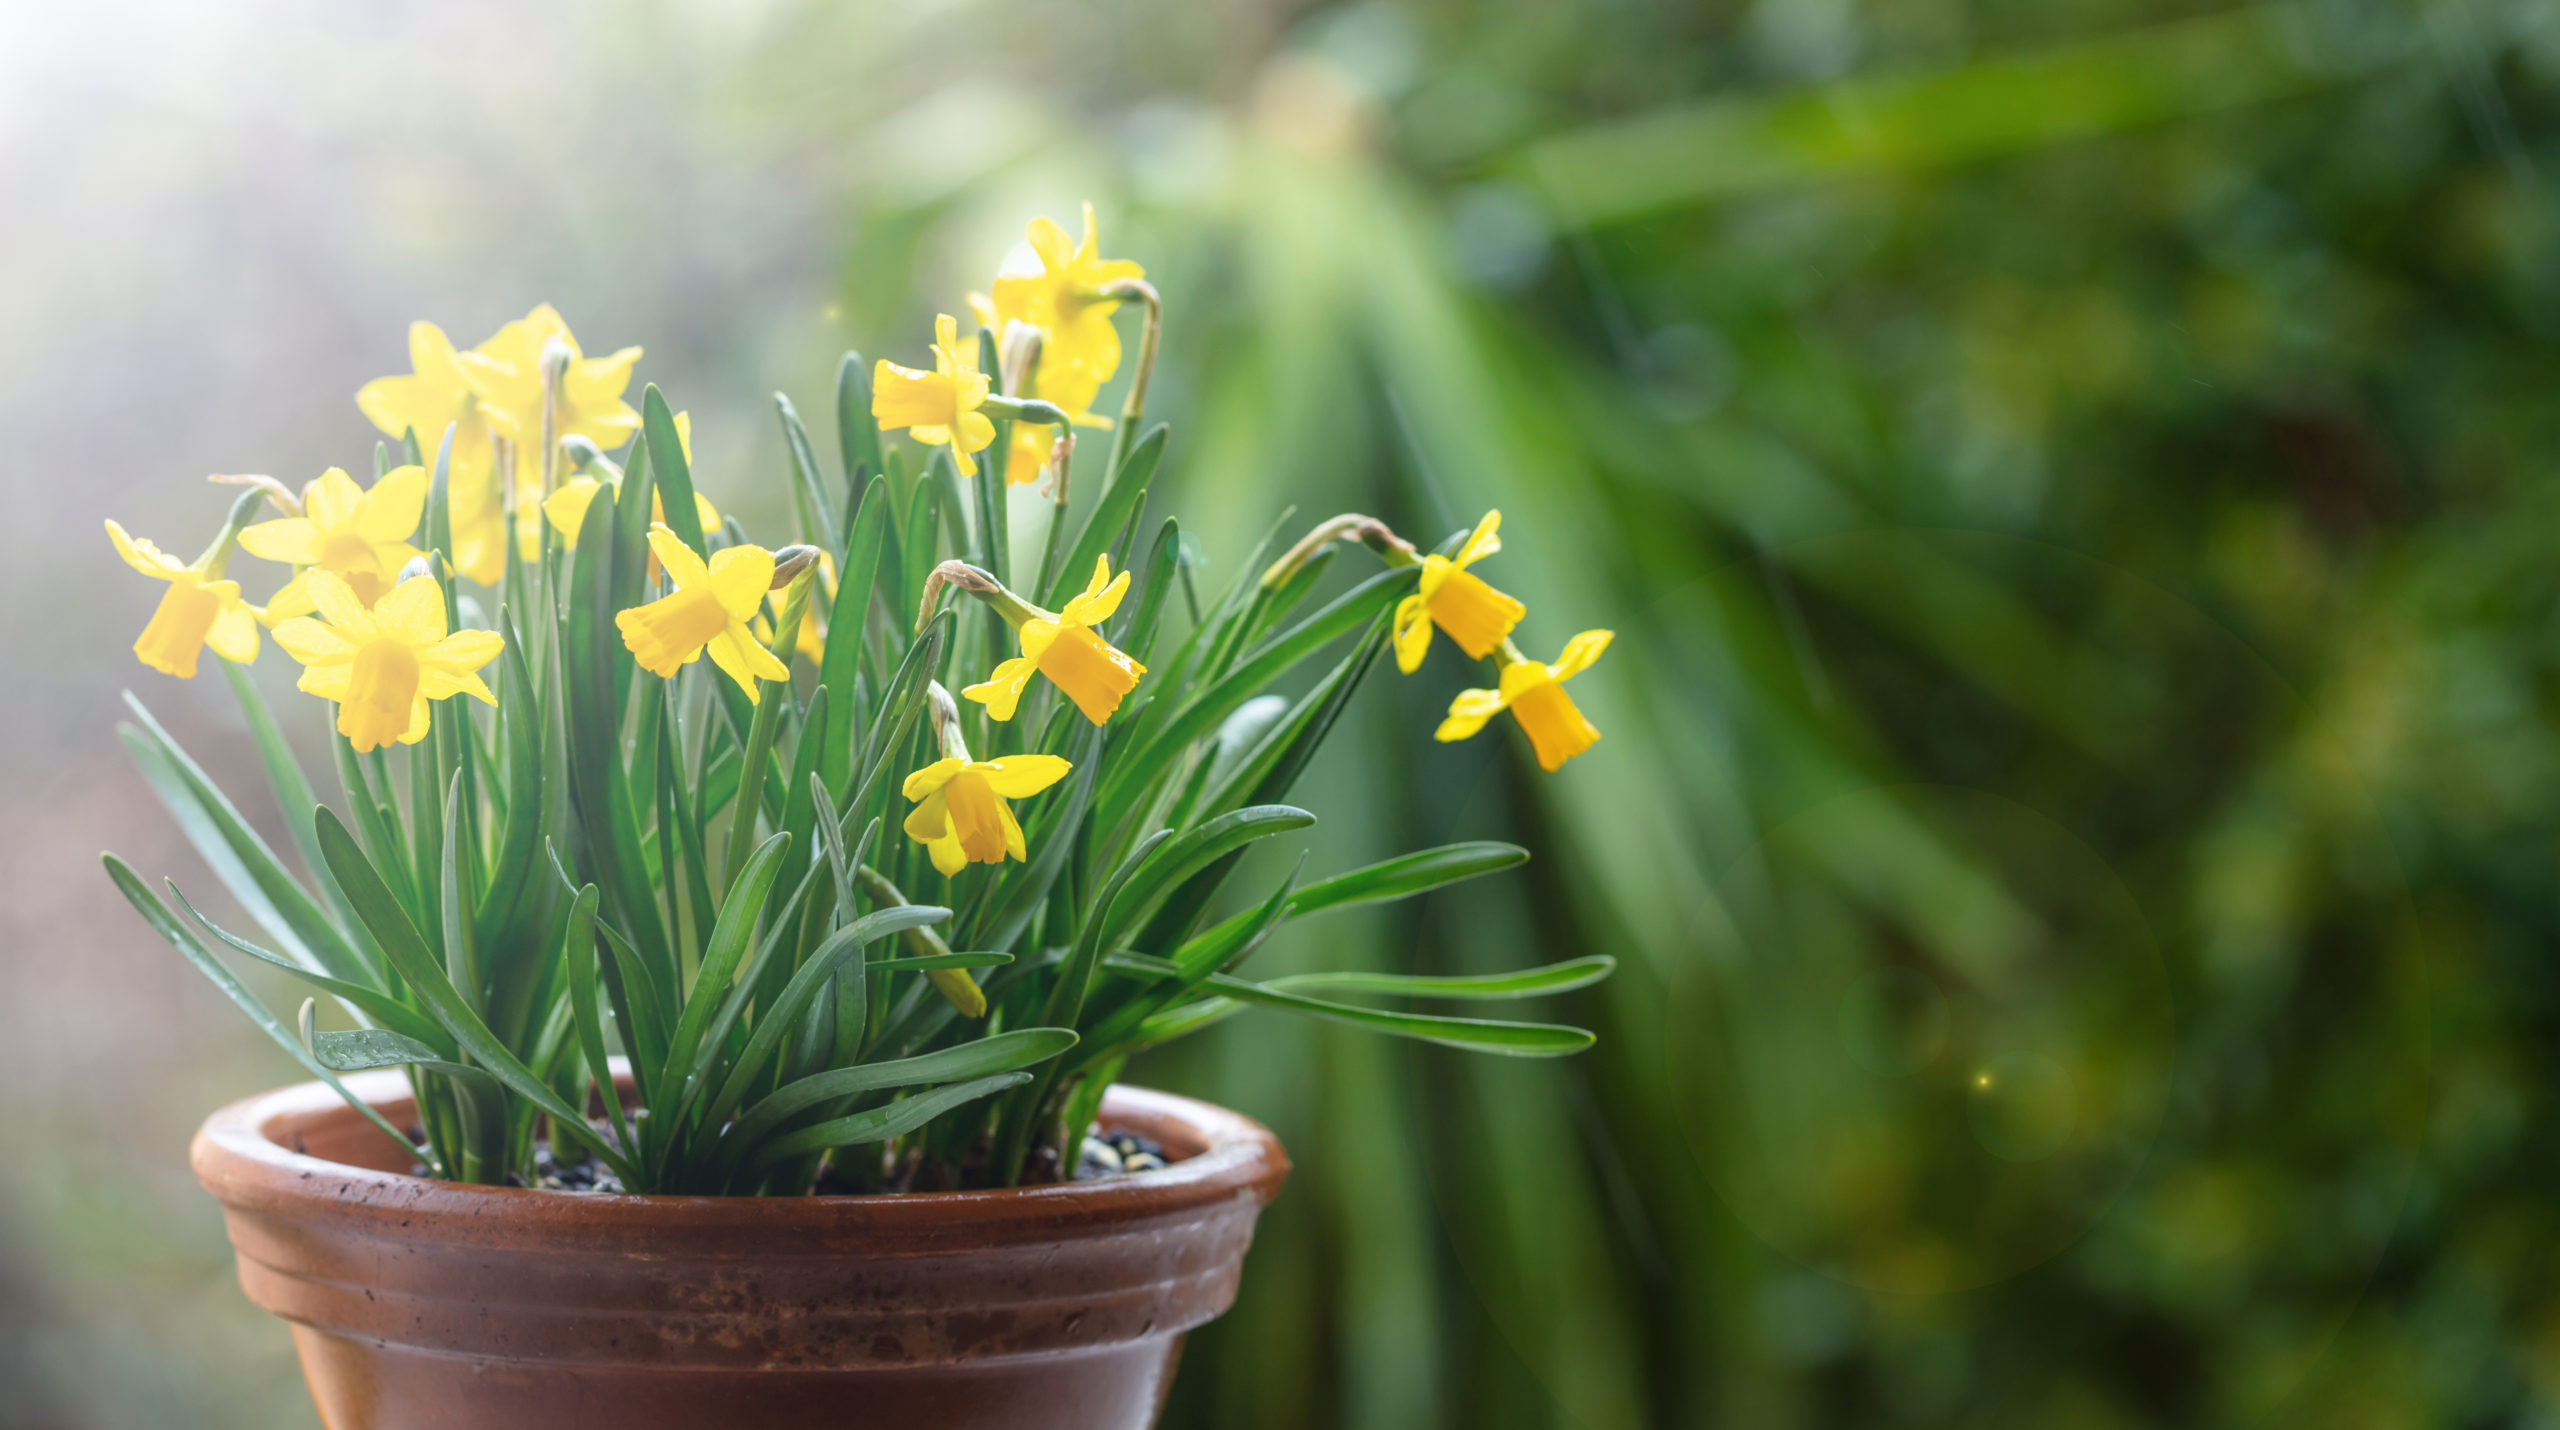 Spring flowers, yellow daffodils in a ceramic pot on blur 